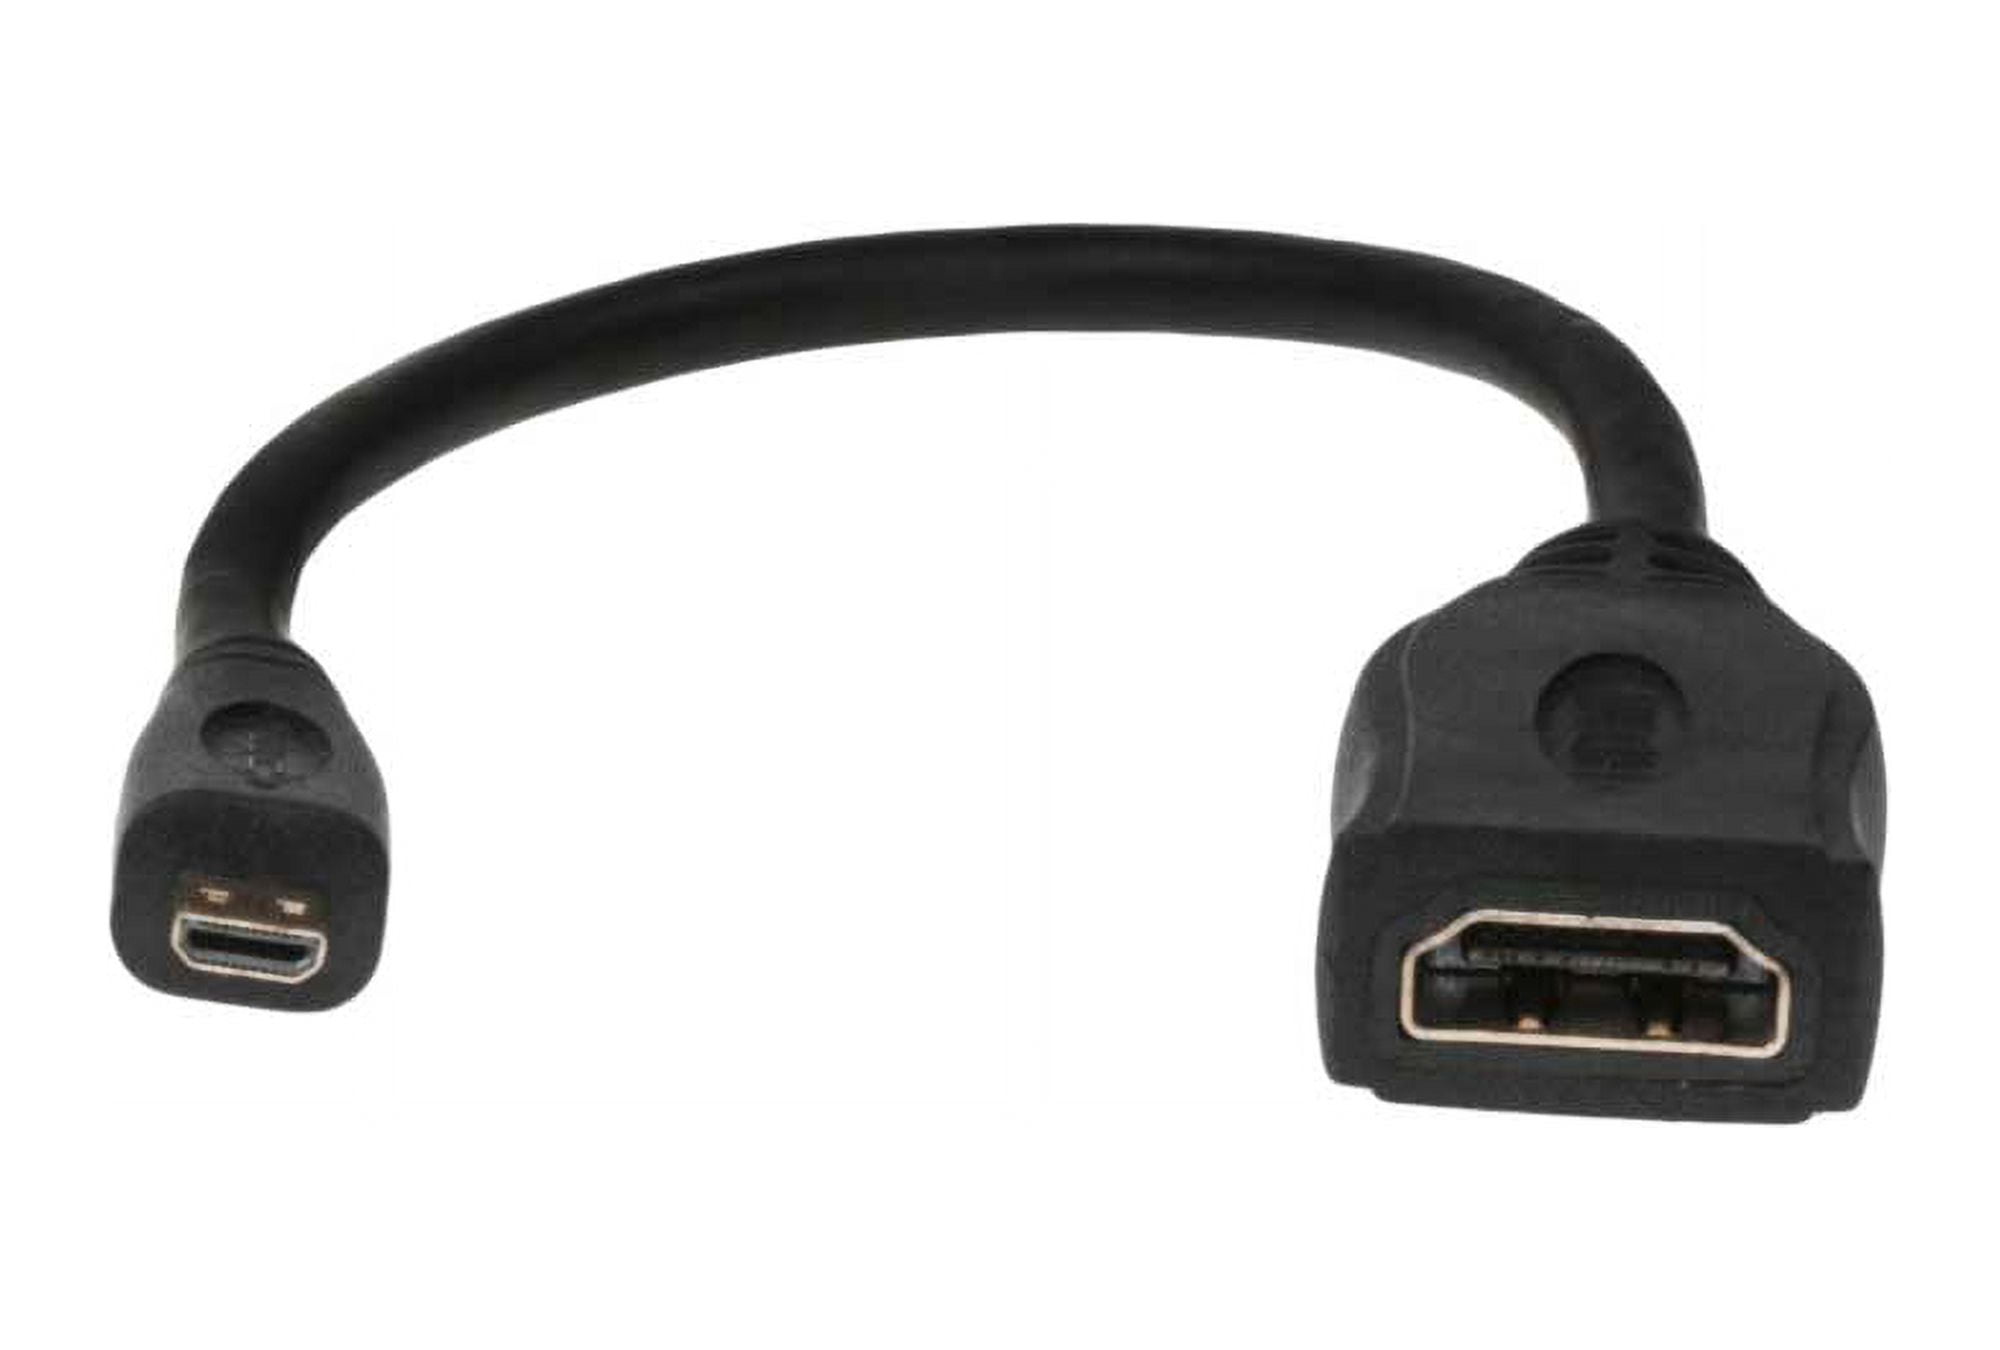 Micro Hdmi Hdmi Short Cable, Type Type Hdmi